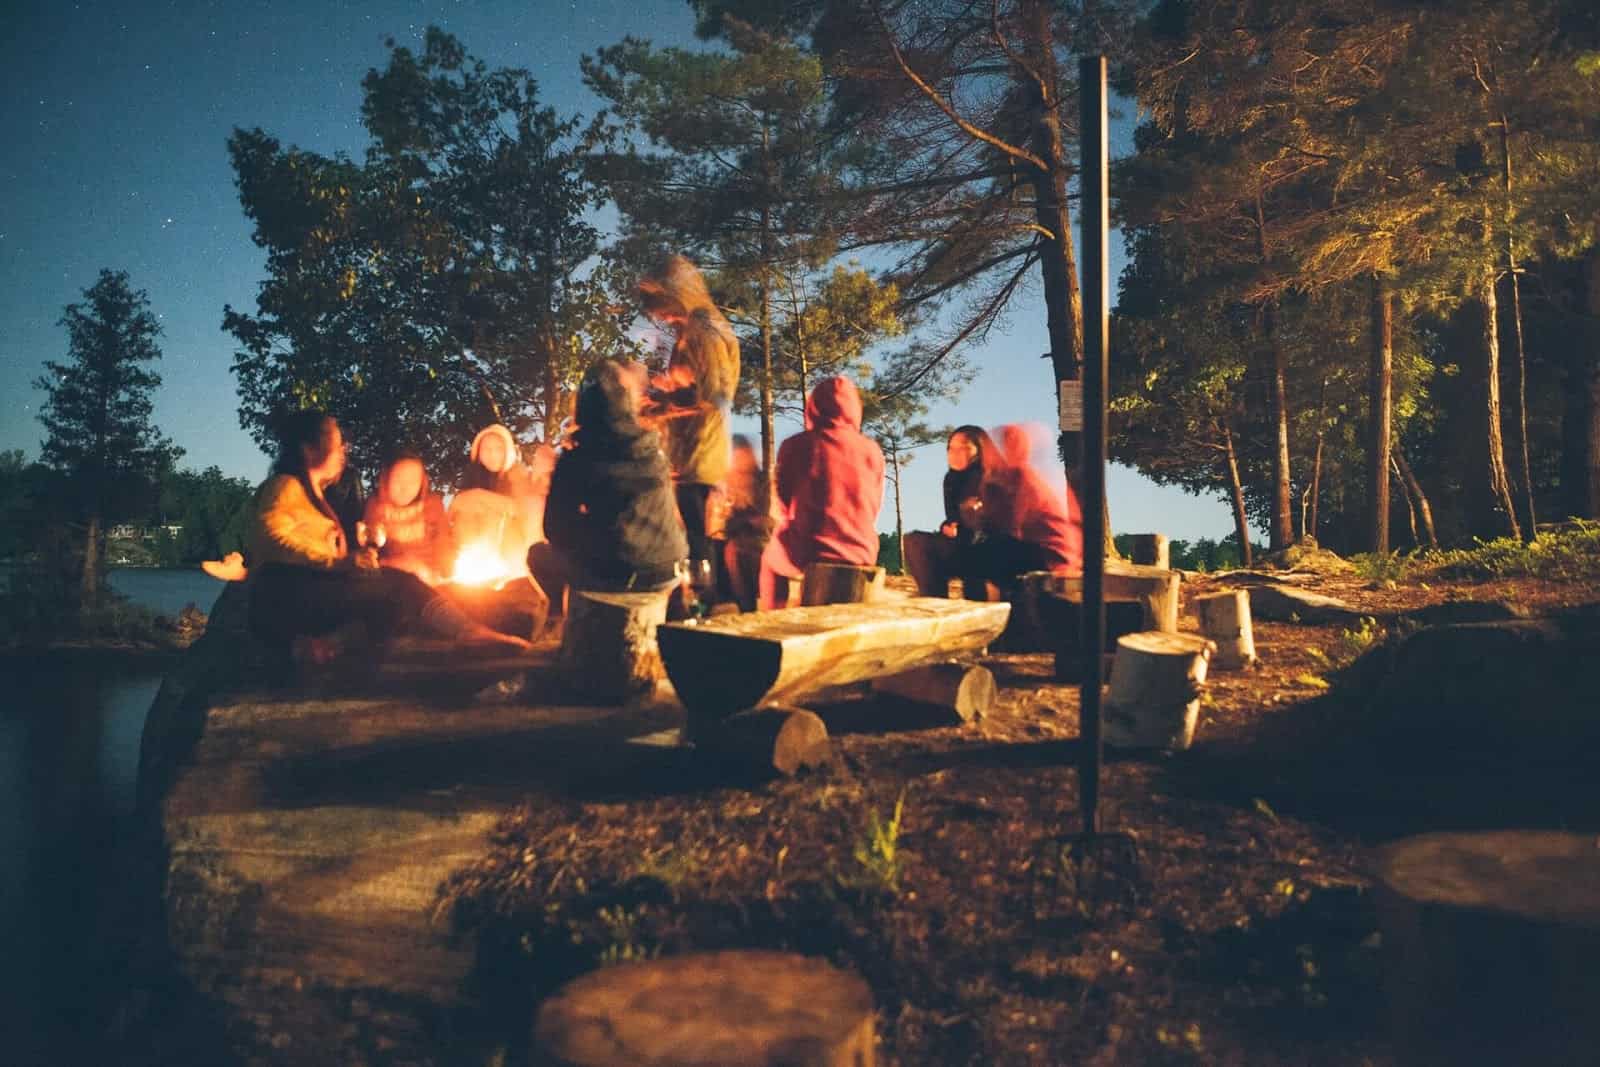 Group of friends around a campfire